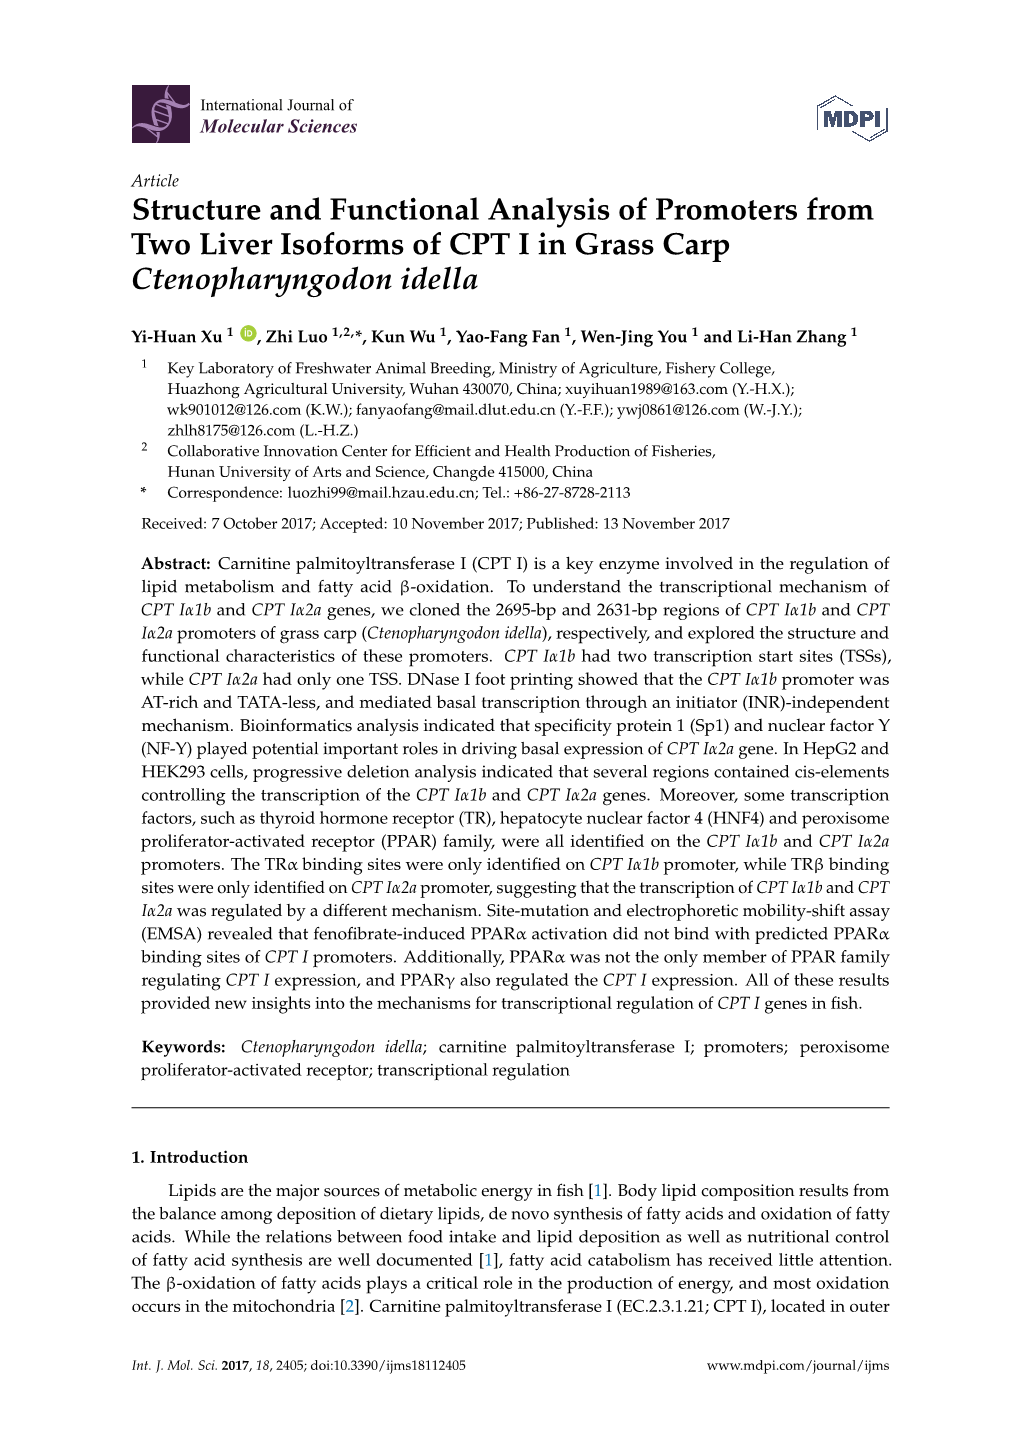 Structure and Functional Analysis of Promoters from Two Liver Isoforms of CPT I in Grass Carp Ctenopharyngodon Idella